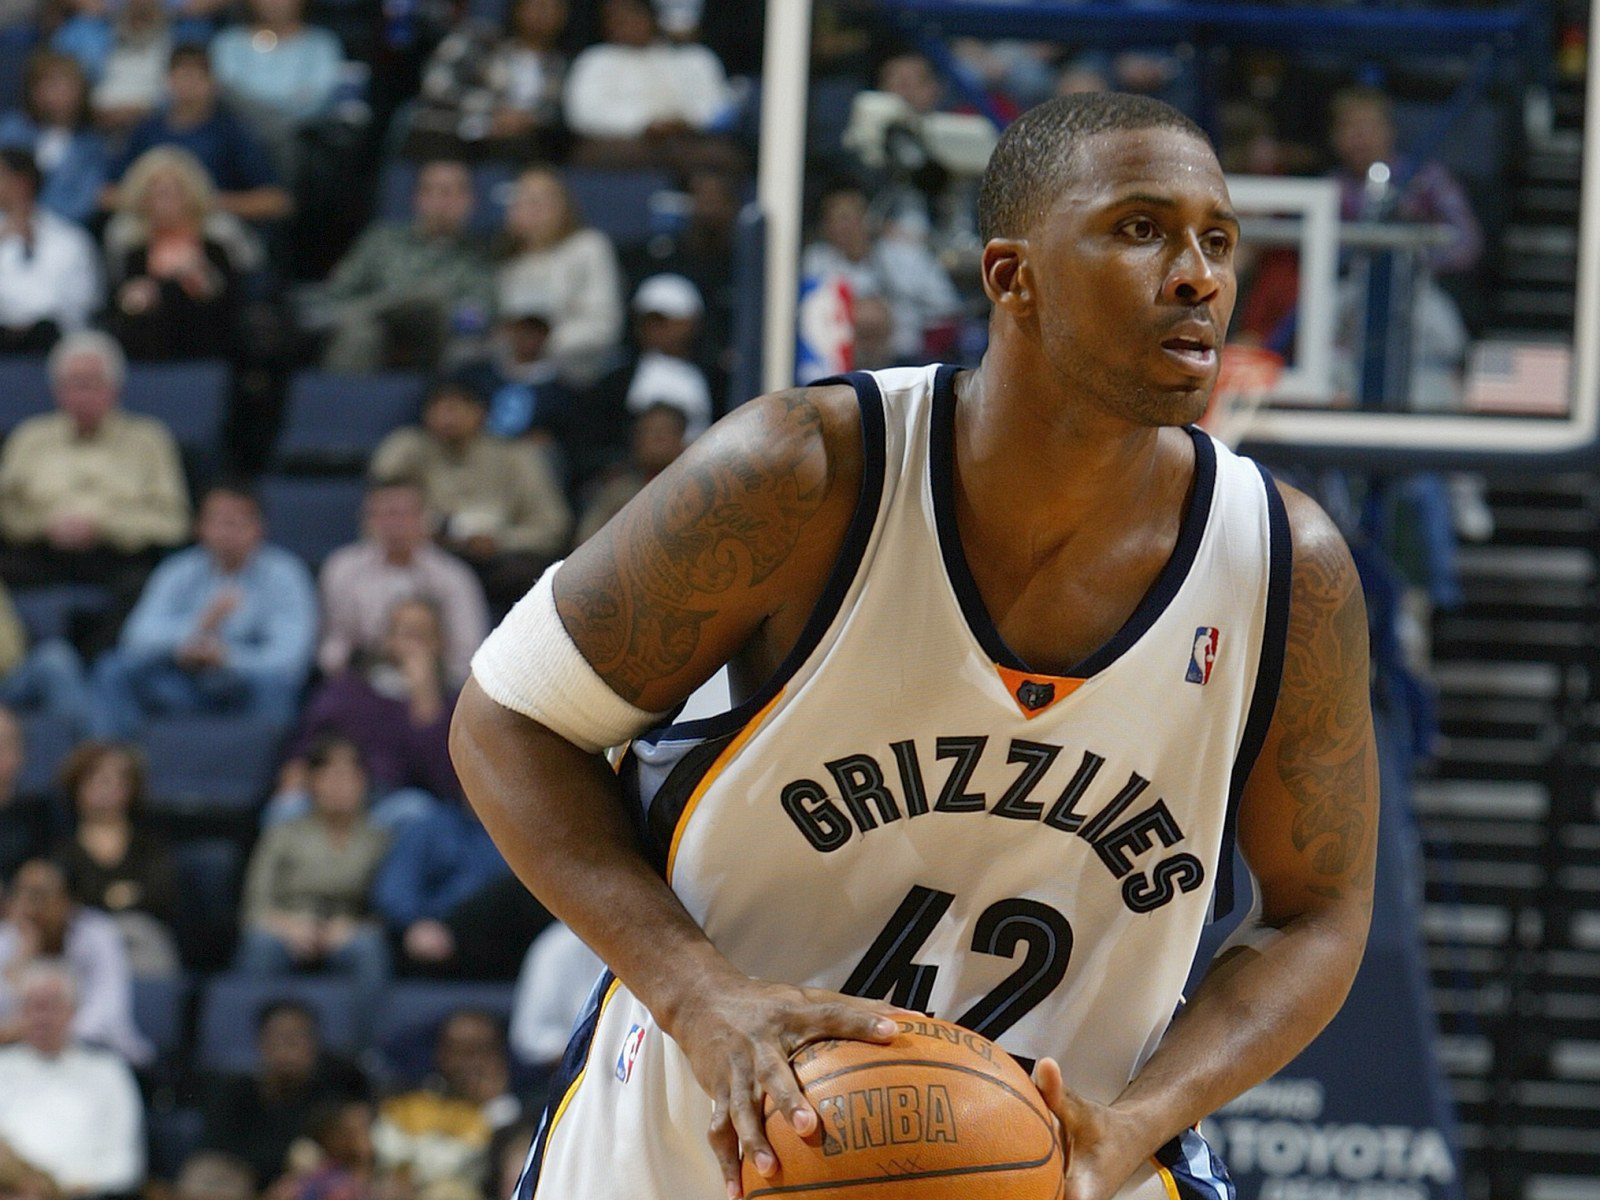 Convict: Lorenzen Wright's ex-wife recruited him to kill former